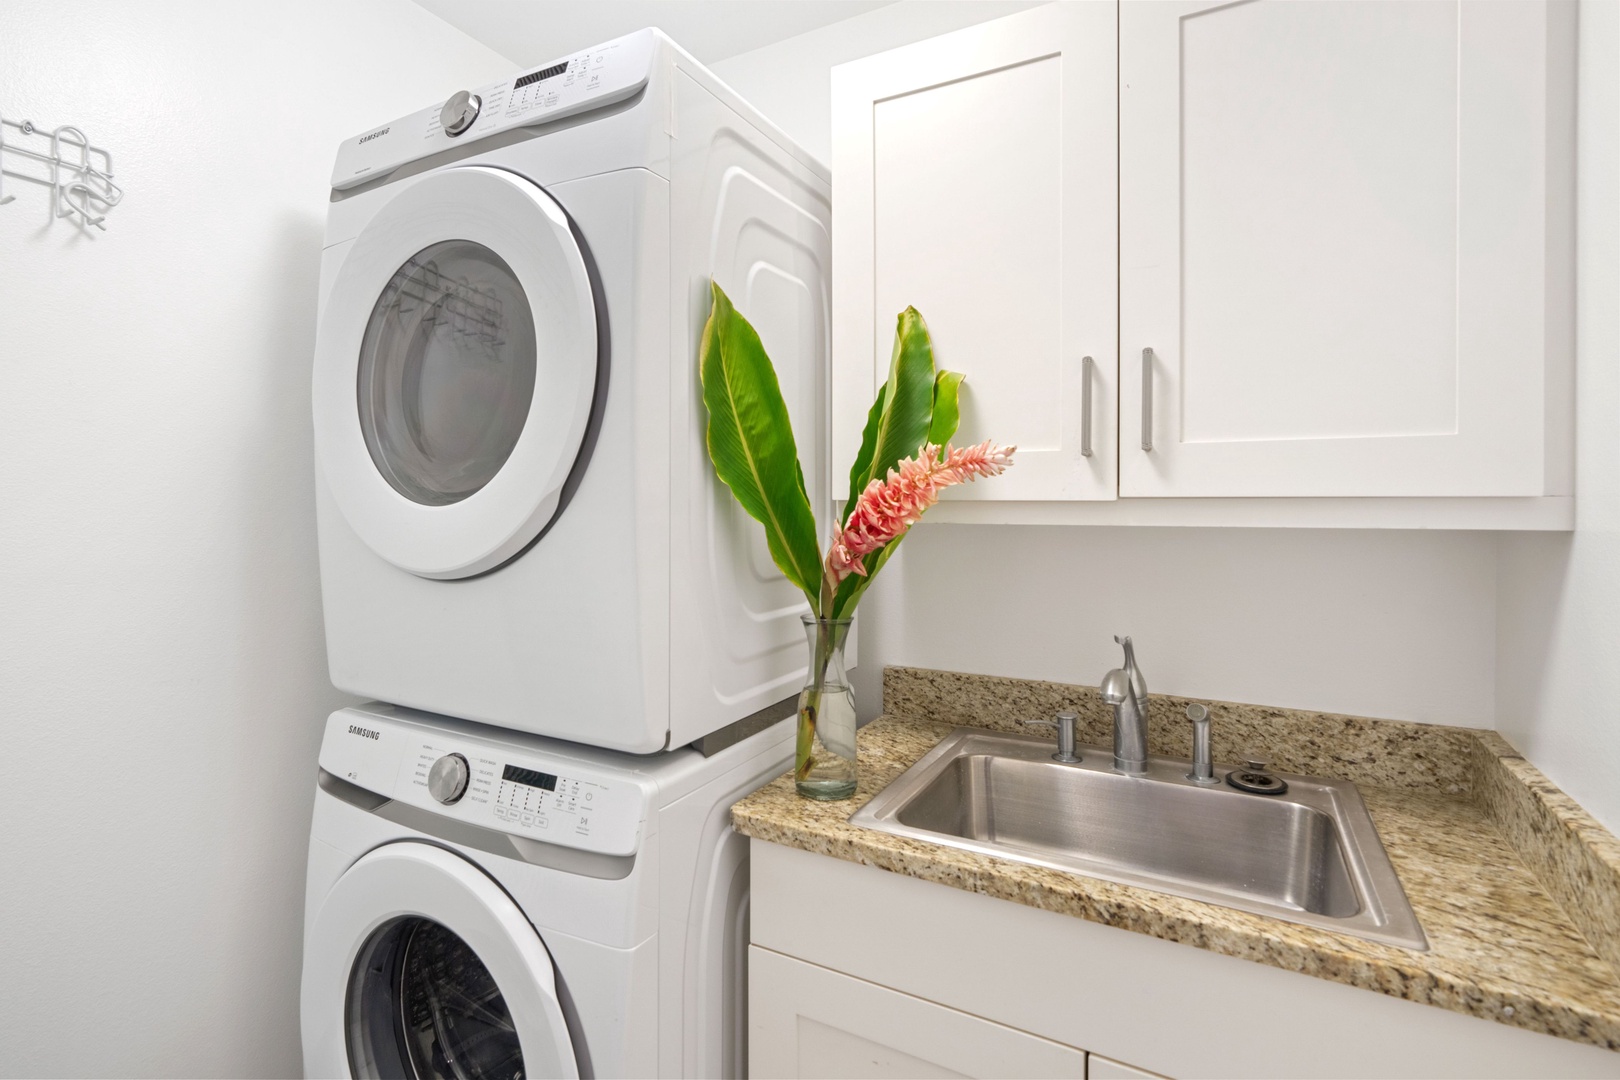 Princeville Vacation Rentals, Tropical Elegance - Laundry area with a washer/dryer